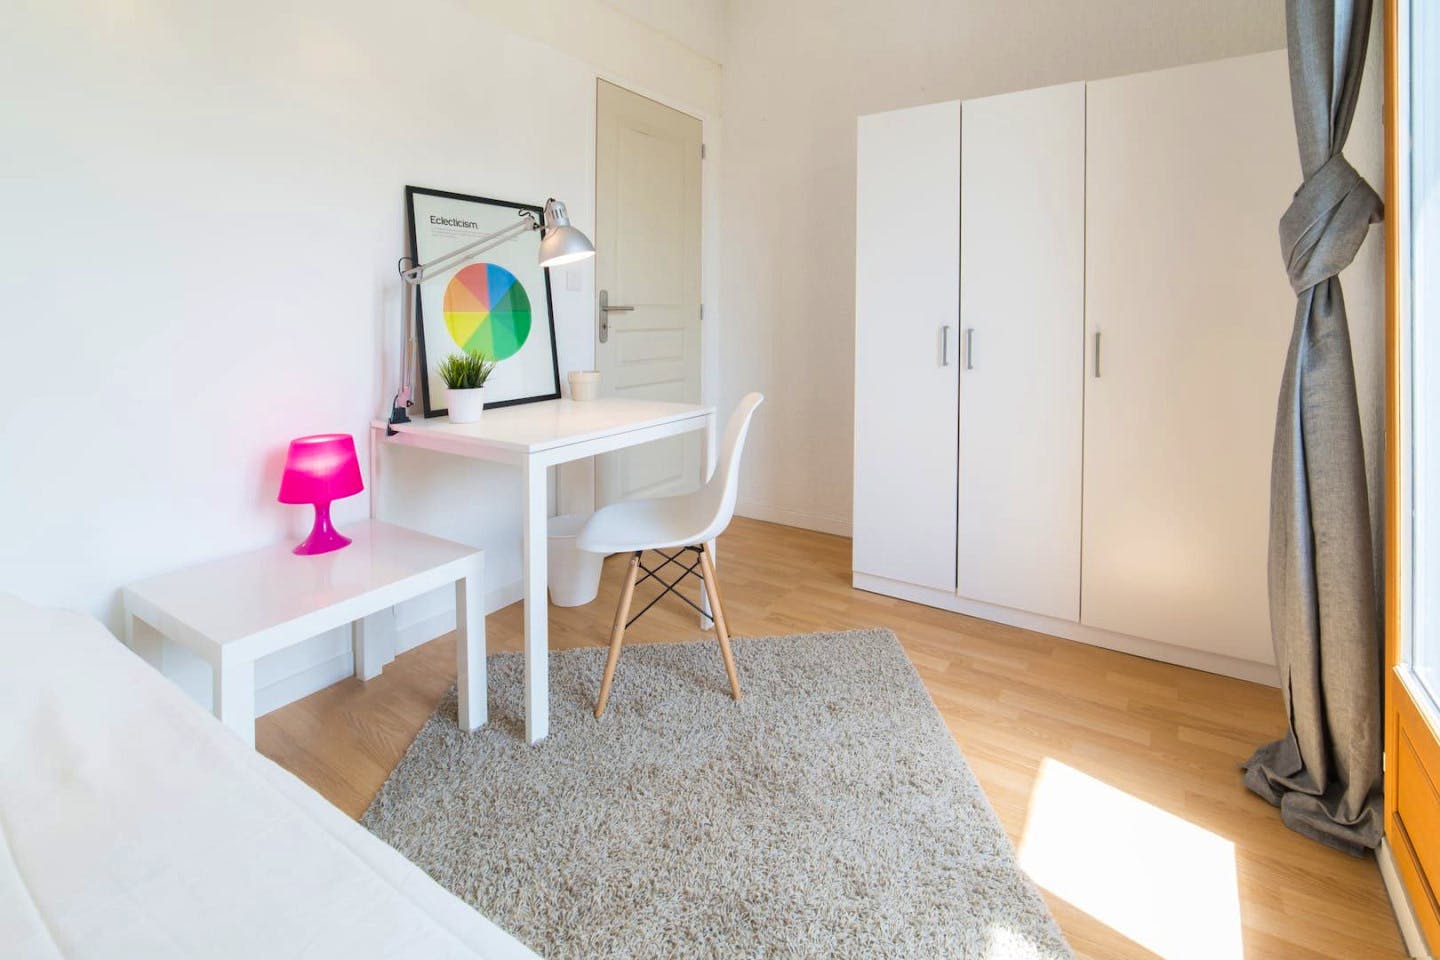 5-Bed Apartment on Bis rue de Barcelone